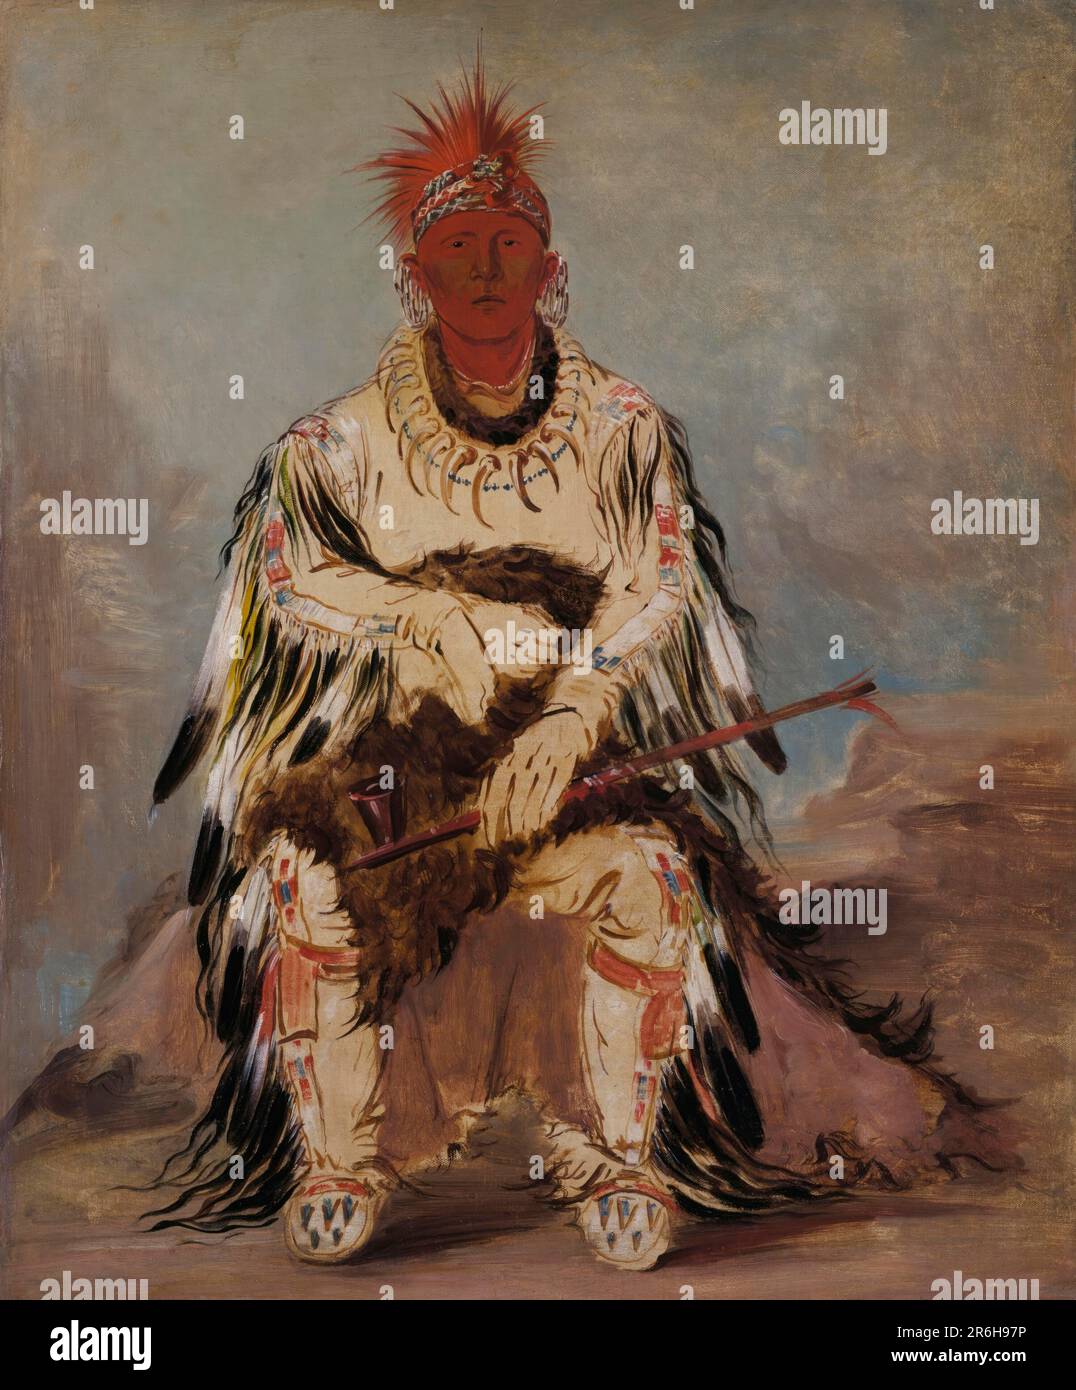 No-wáy-ke-súg-gah, He Who Strikes Two at Once, a Brave. oil on canvas. Date: 1832. Museum: Smithsonian American Art Museum. Stock Photo